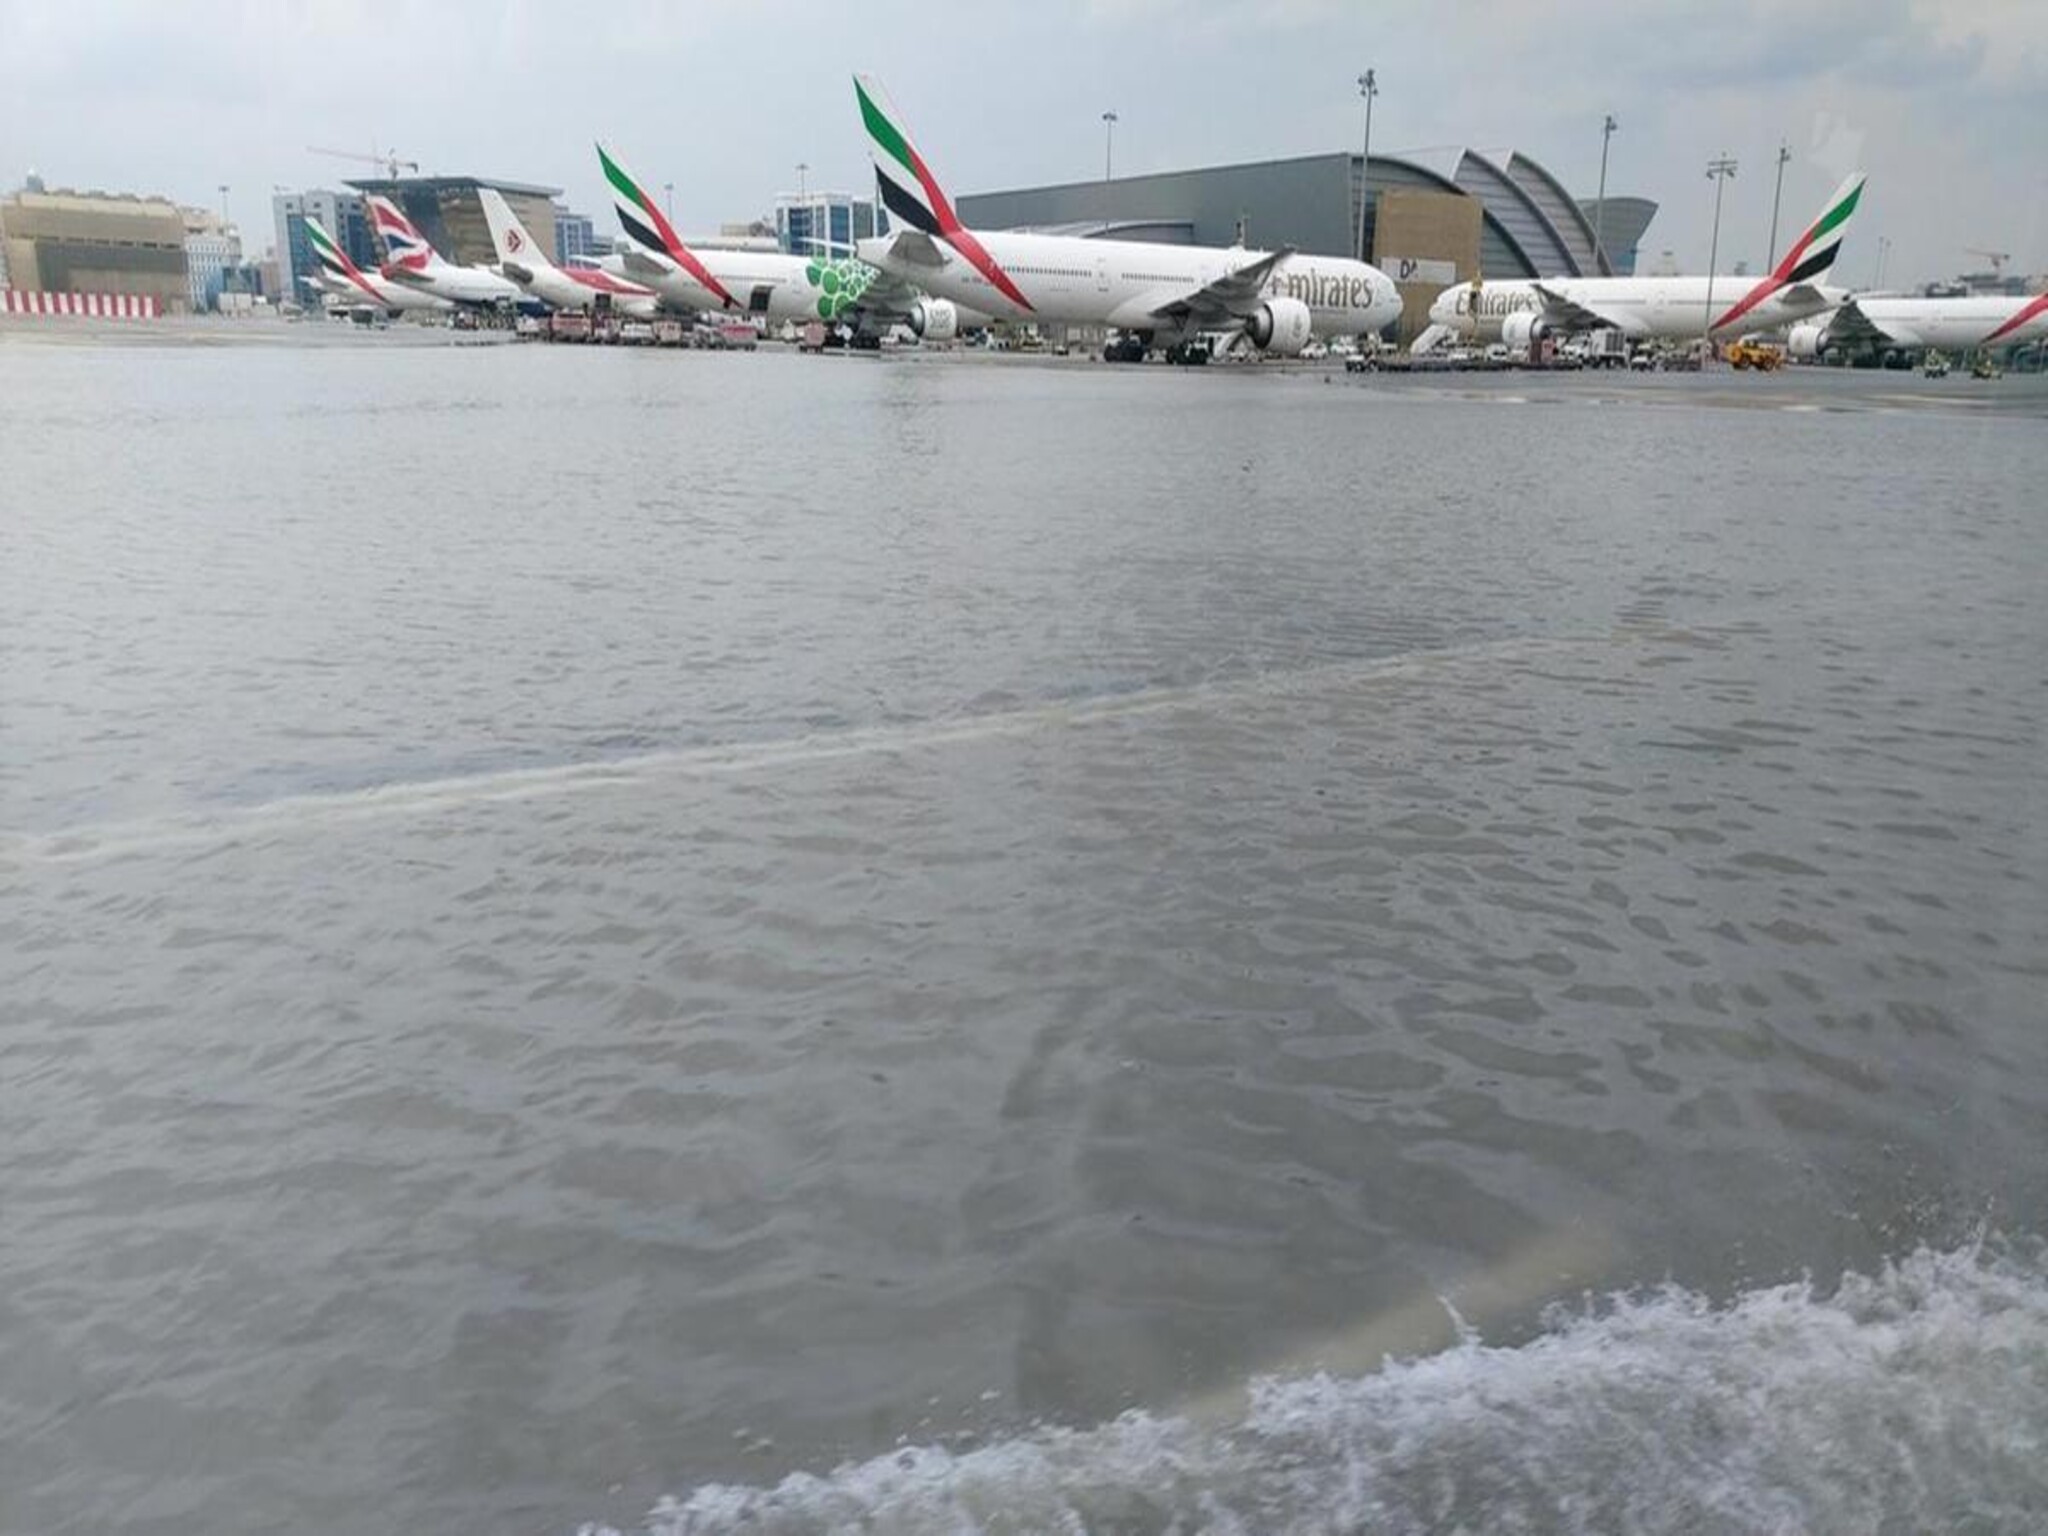 Dubai Airports announced the cancellation of 17 flights due to the UAE storm